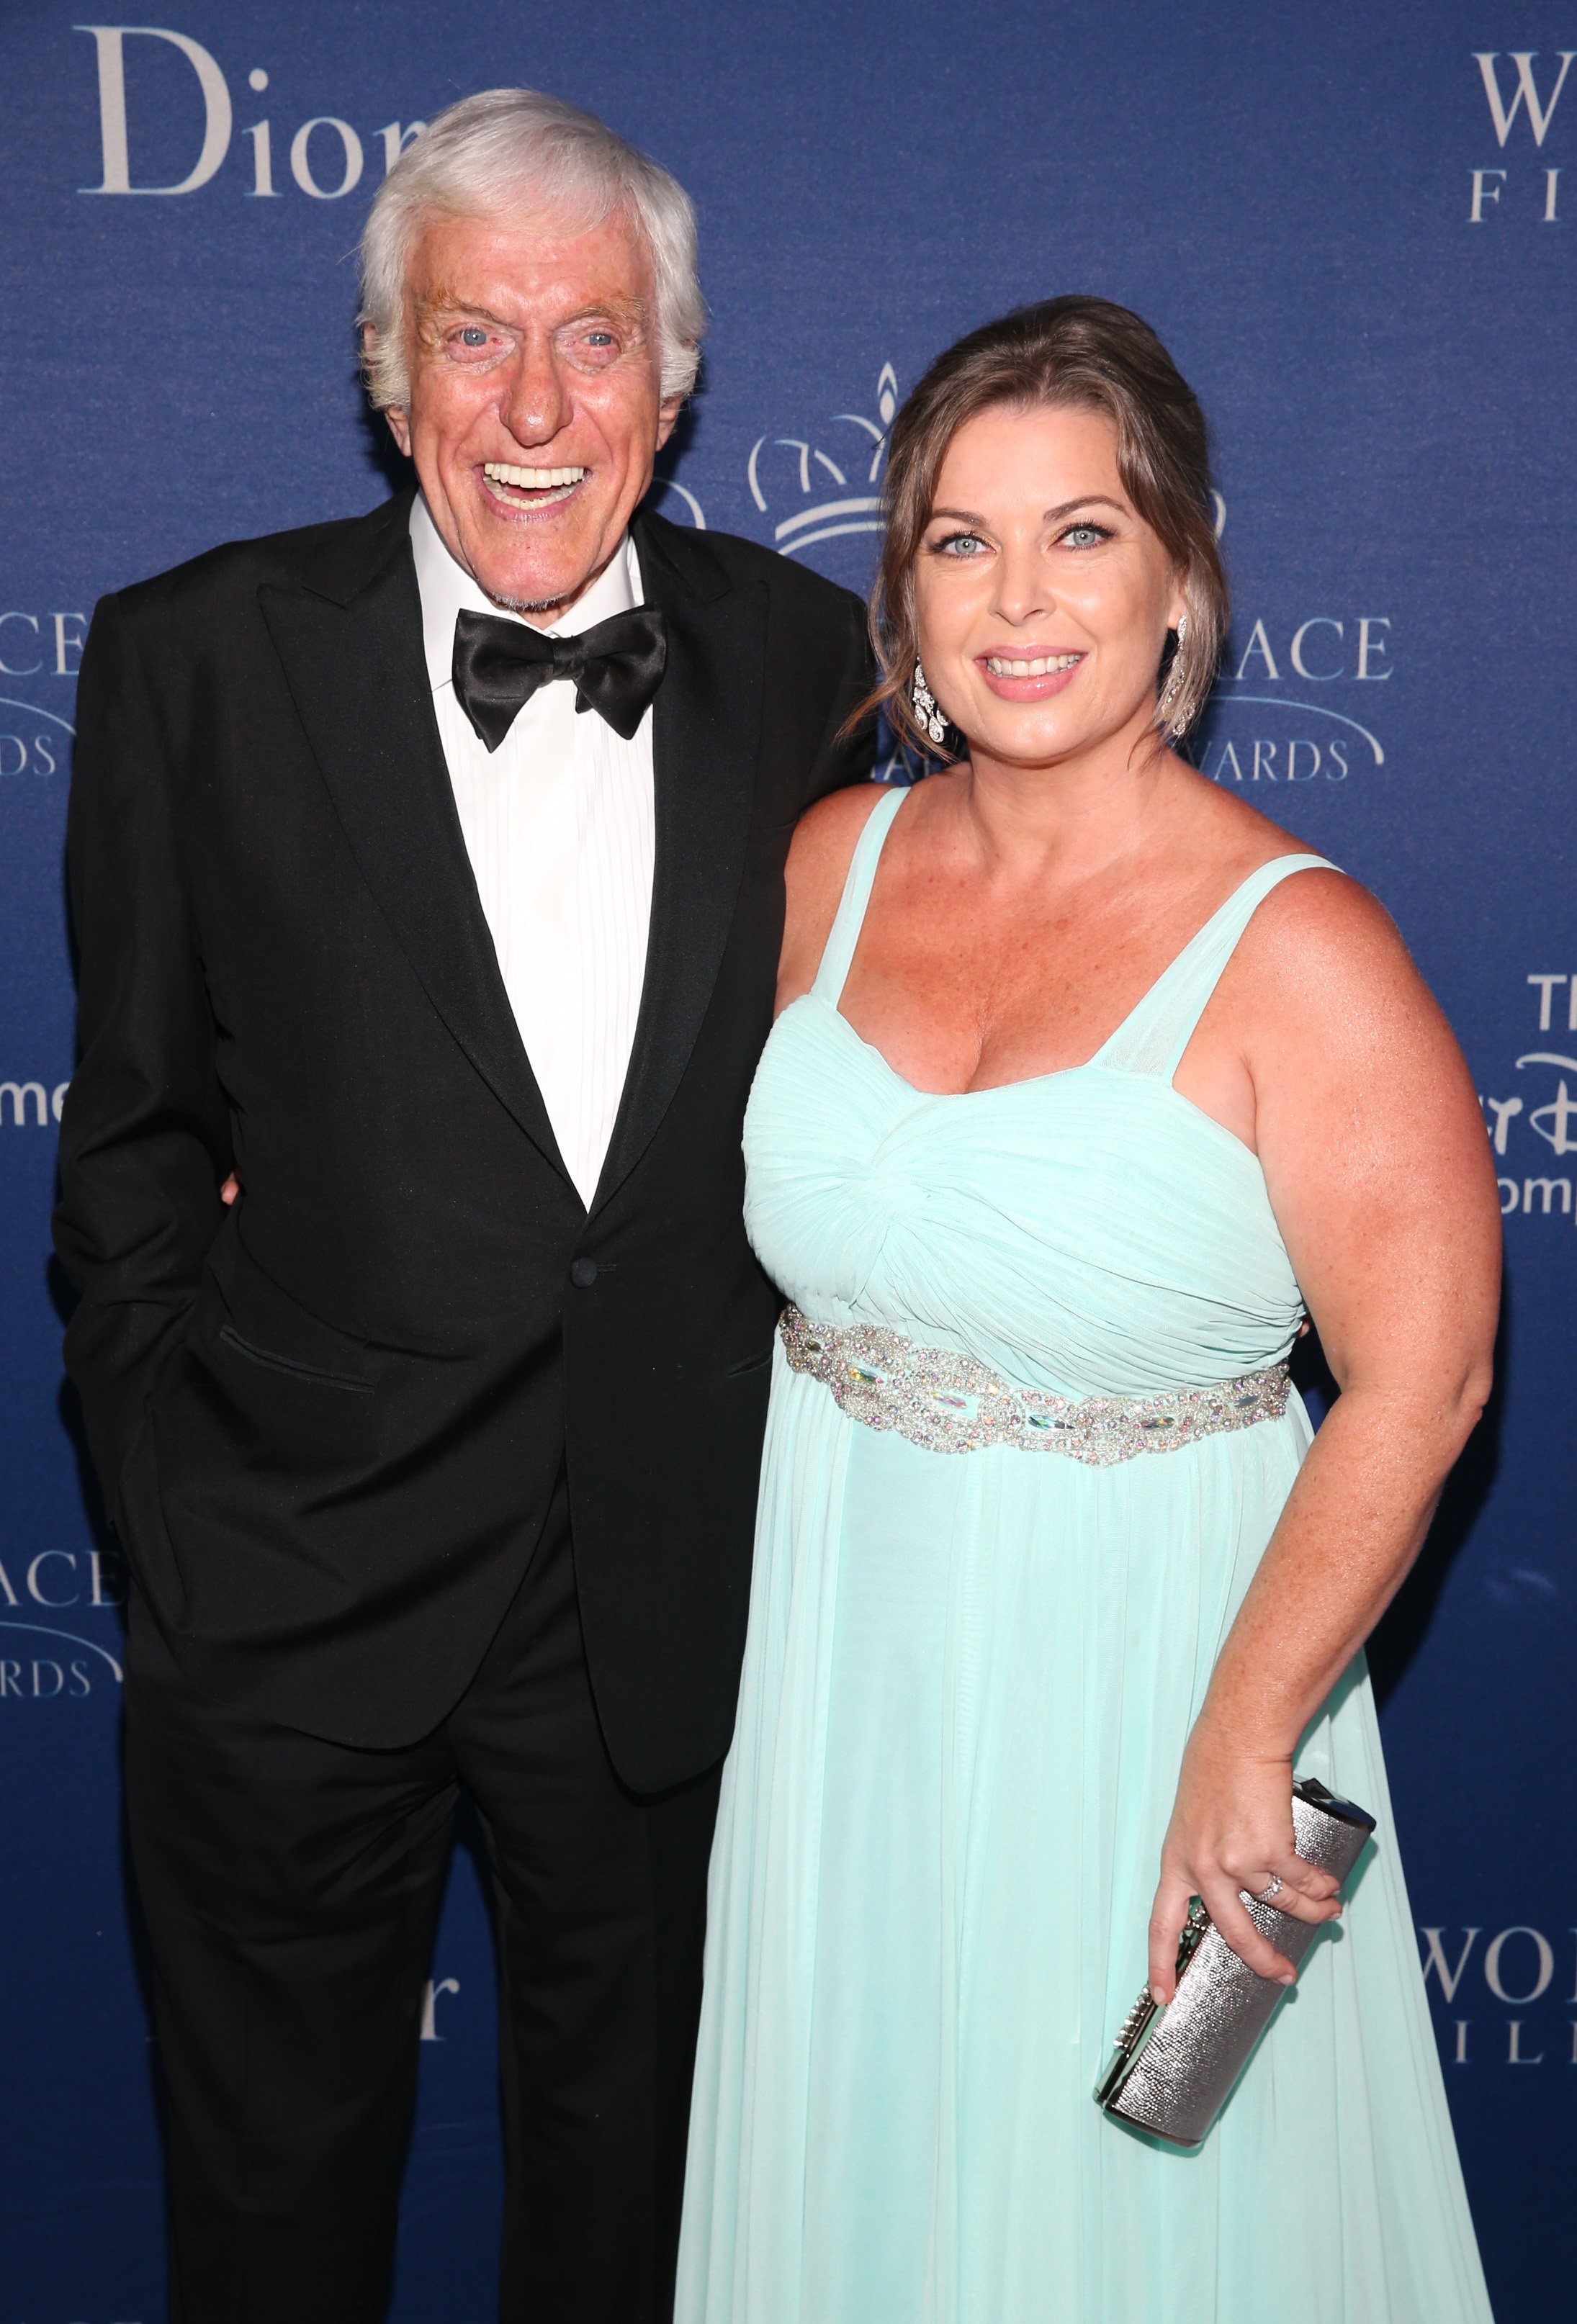 Dick Van Dyke and Arlene Silver at the Princess Grace Awards Gala on October 8, 2014 in Beverly Hills. | Source: Getty Images